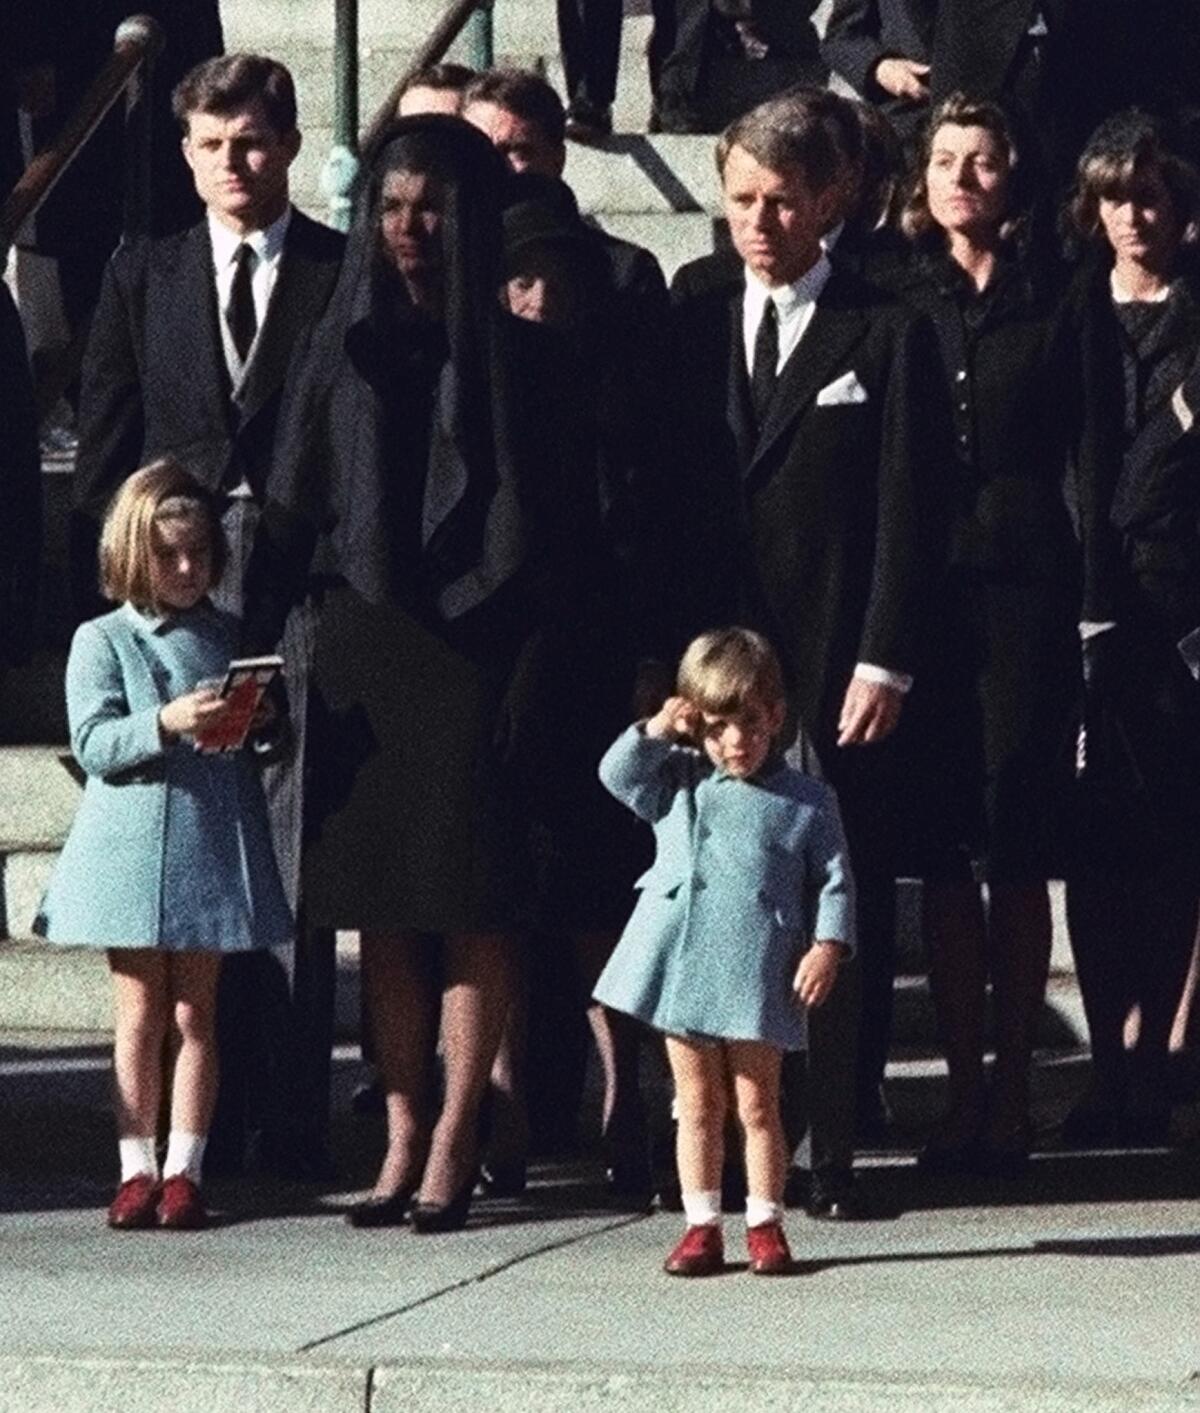 Three-year-old John F. Kennedy Jr. salutes his father's casket as it passes on a horse-drawn caisson during funeral ceremonies in Washington on Nov. 25, 1963. Behind John Jr. stands his uncle Robert F. Kennedy, mother Jacqueline Kennedy, uncle Edward M. Kennedy and sister Caroline Kennedy.